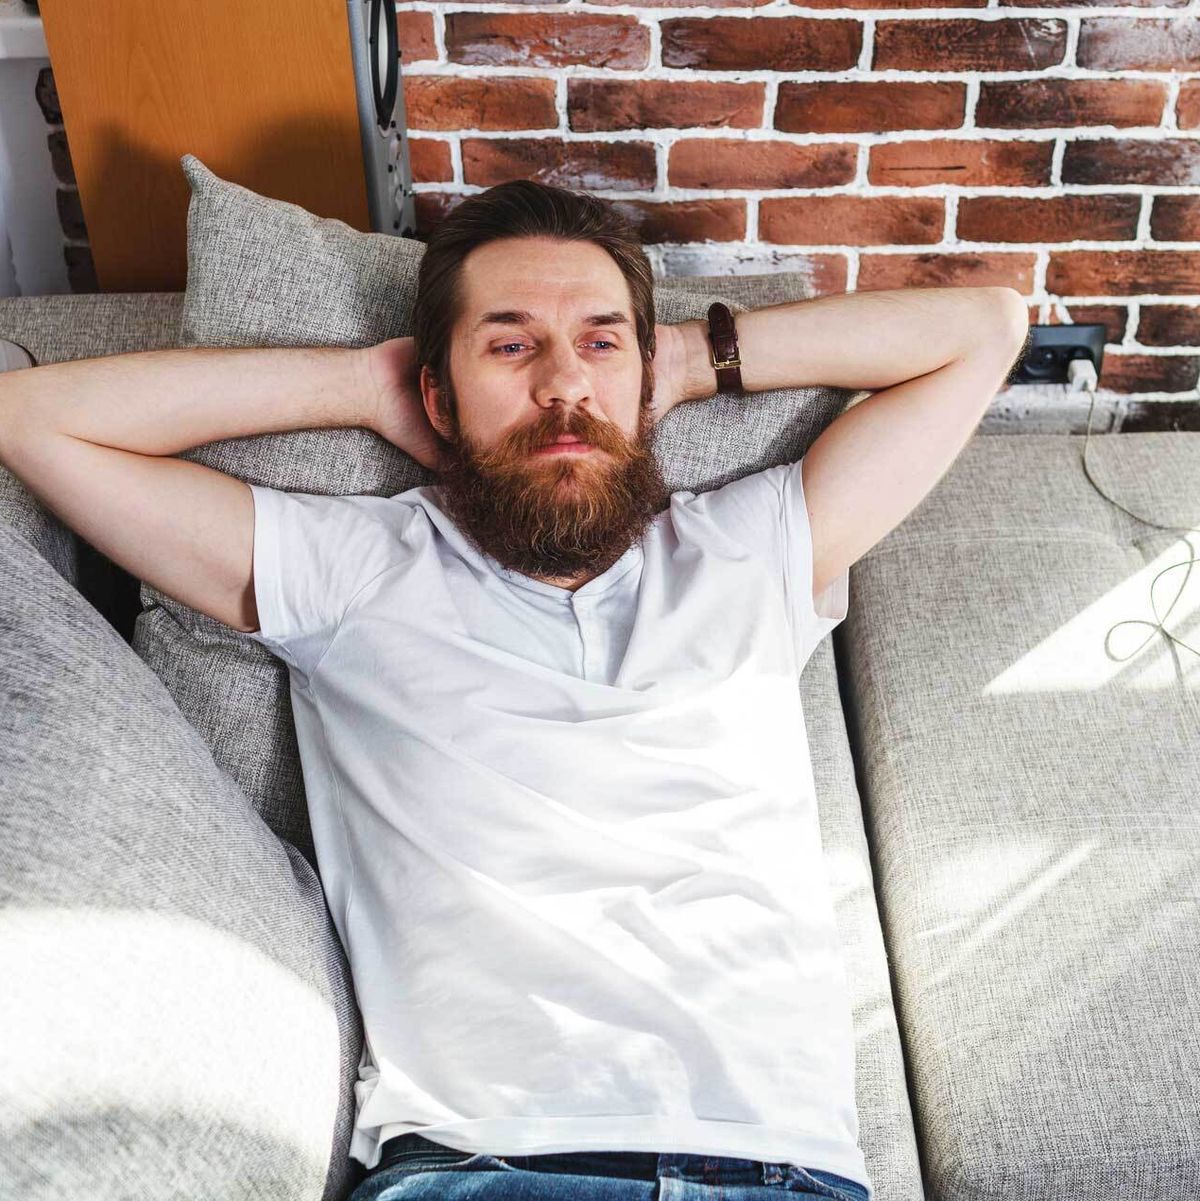 man reclining on sofa with serious expression